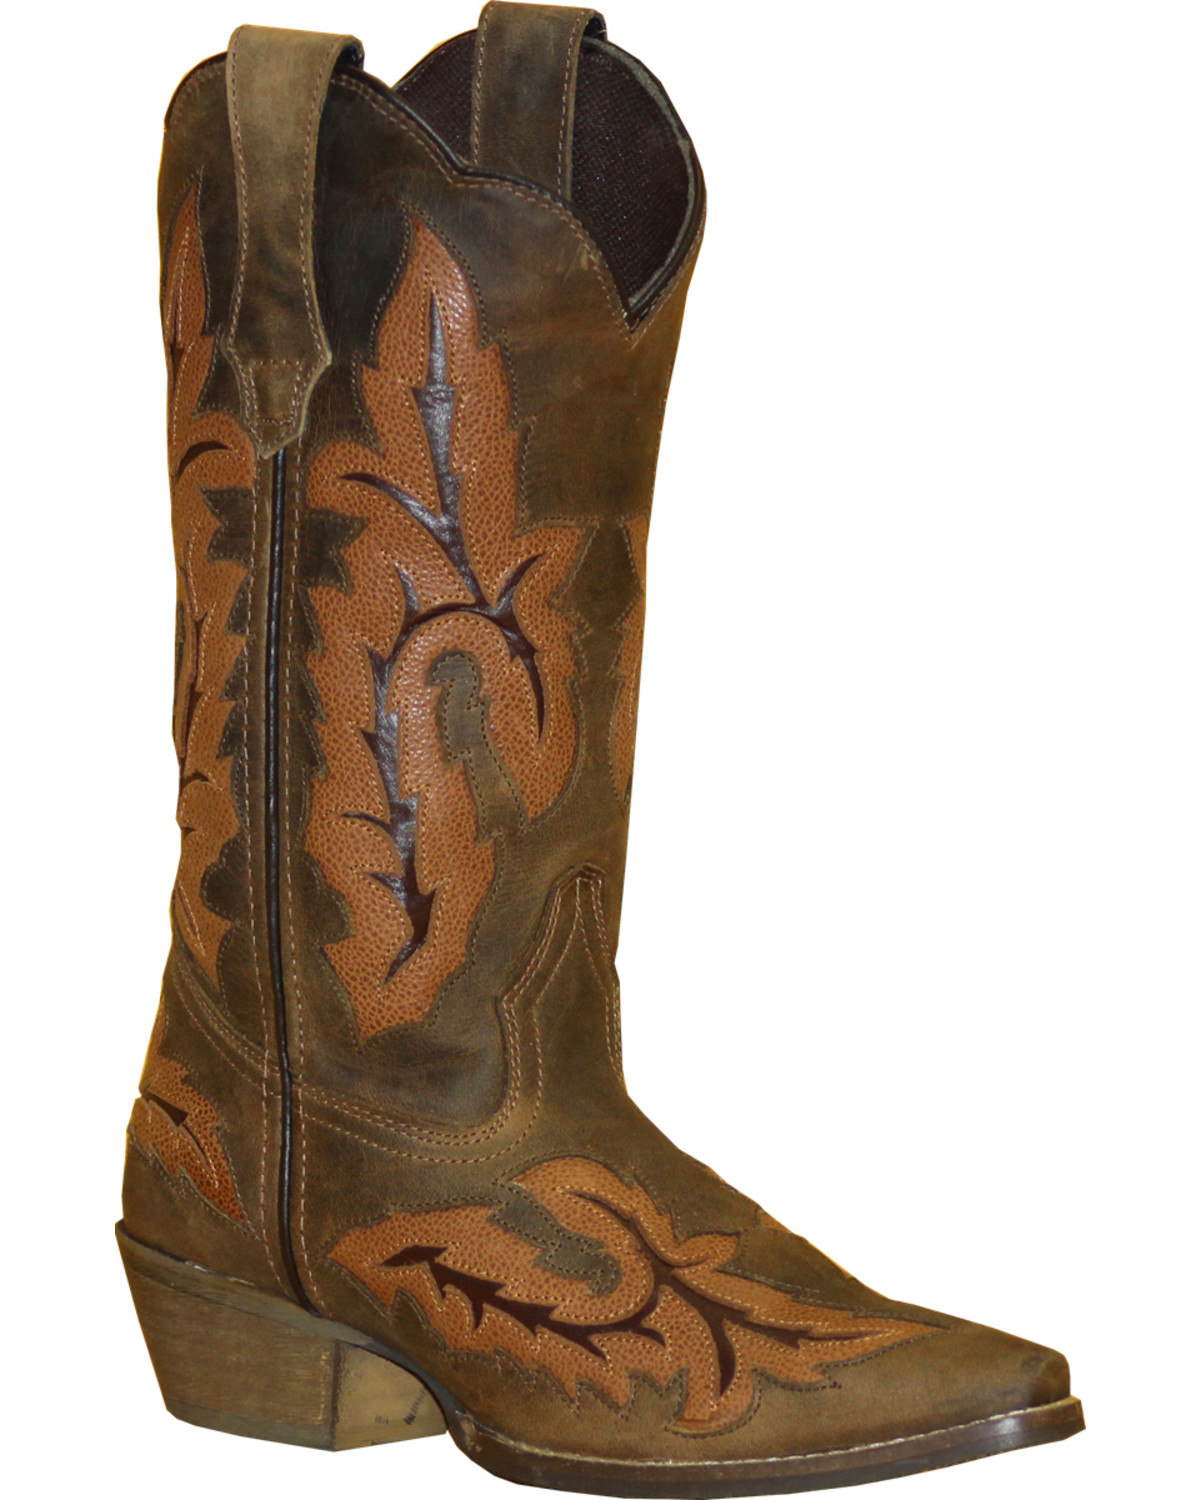 Rawhide by Abilene Boots Women's Cutout Inlay Cowgirl - Snip Toe